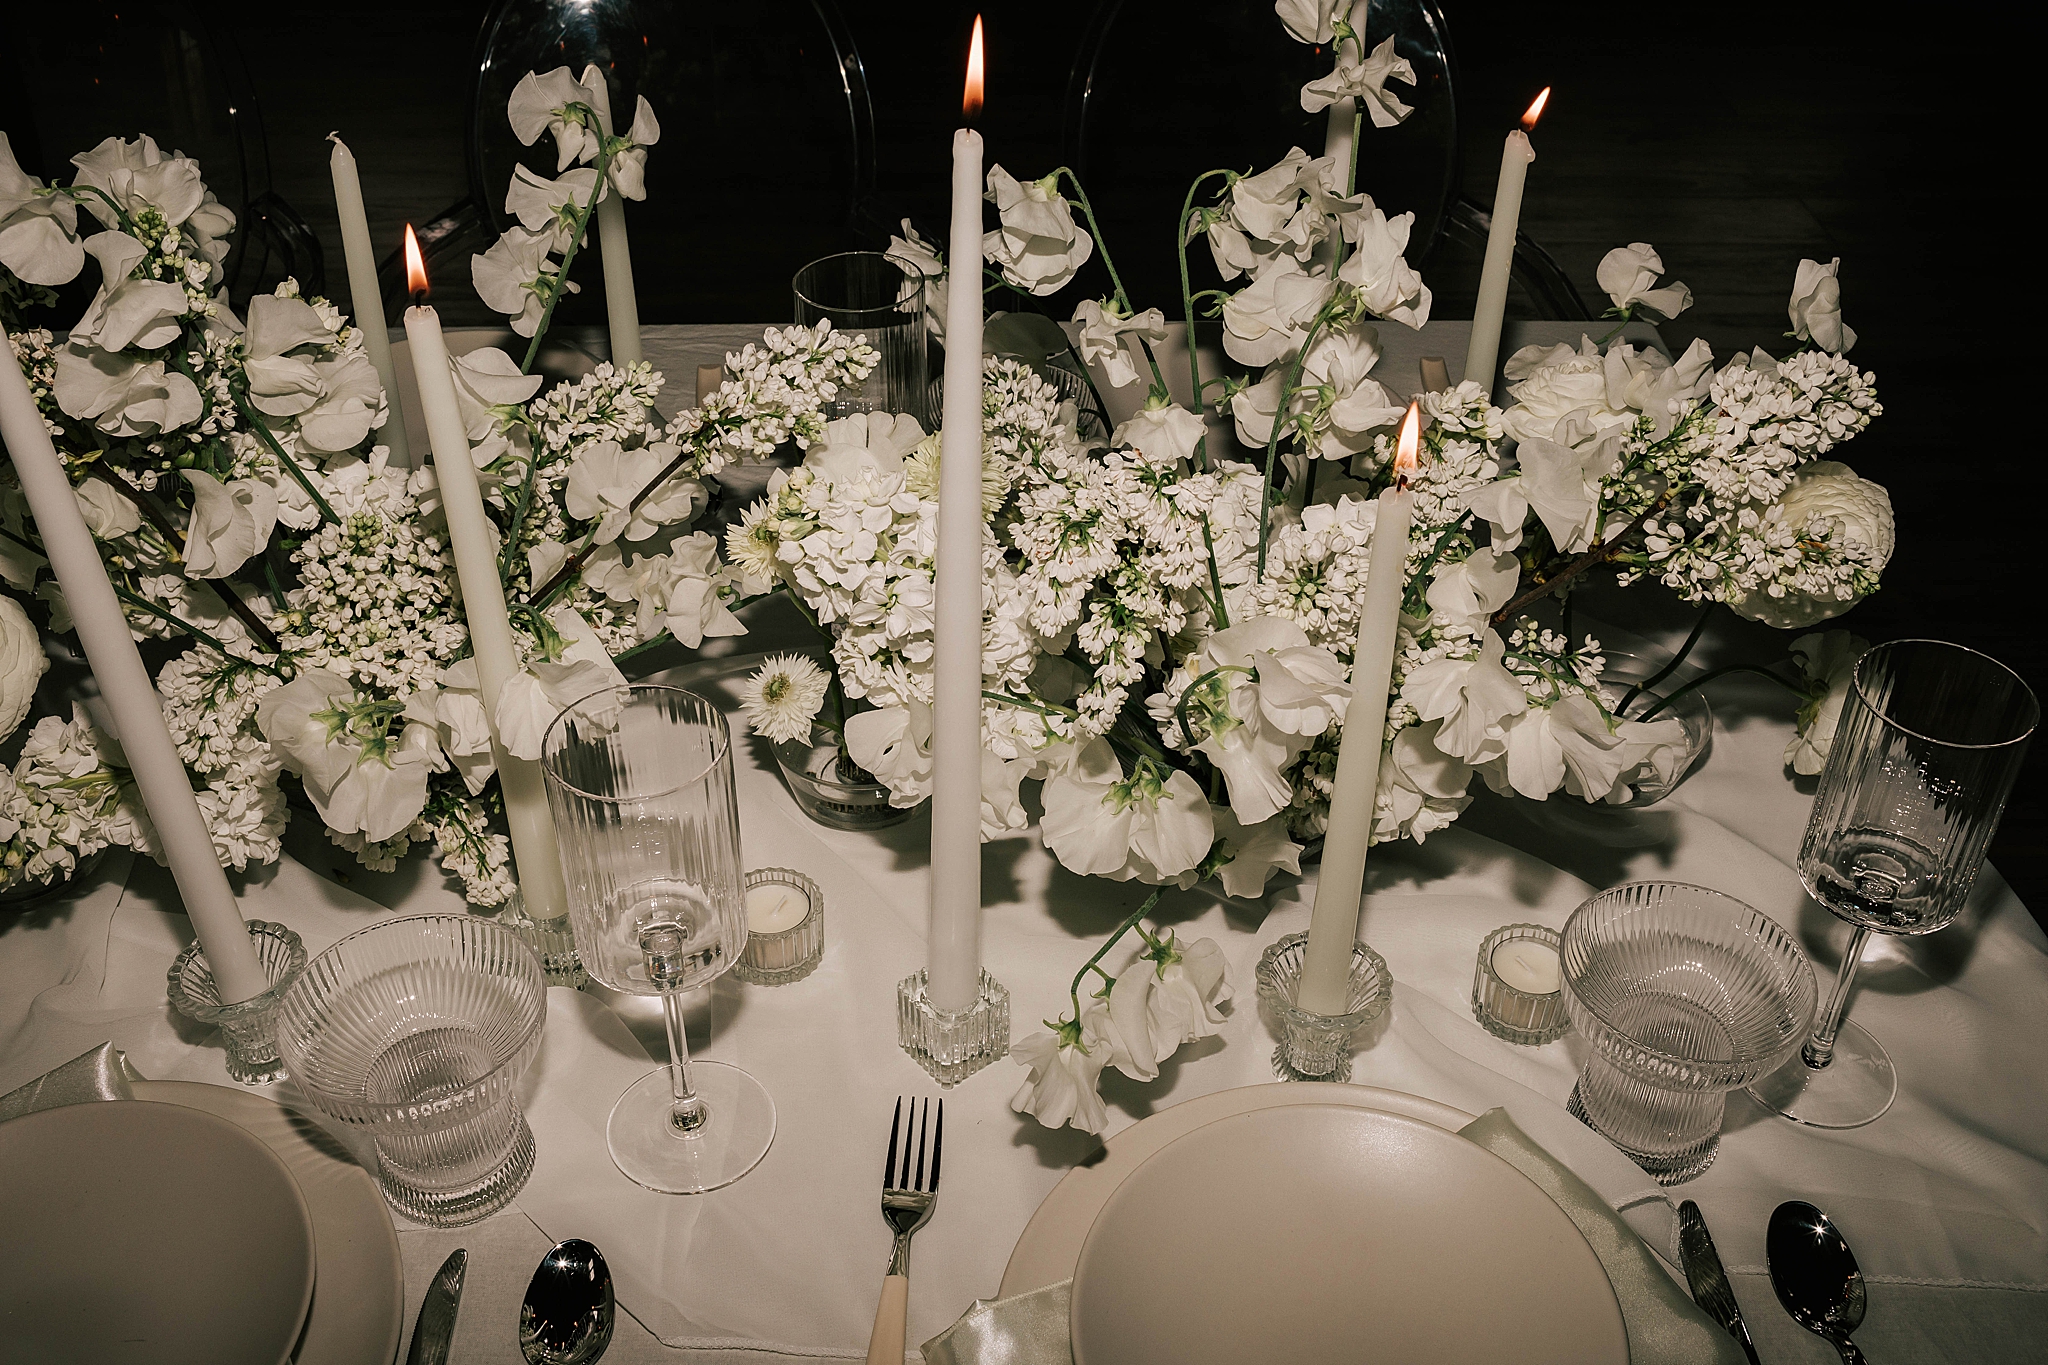 wedding tablescape at a luxury caldera house wedding taken by adrian wayment photo.